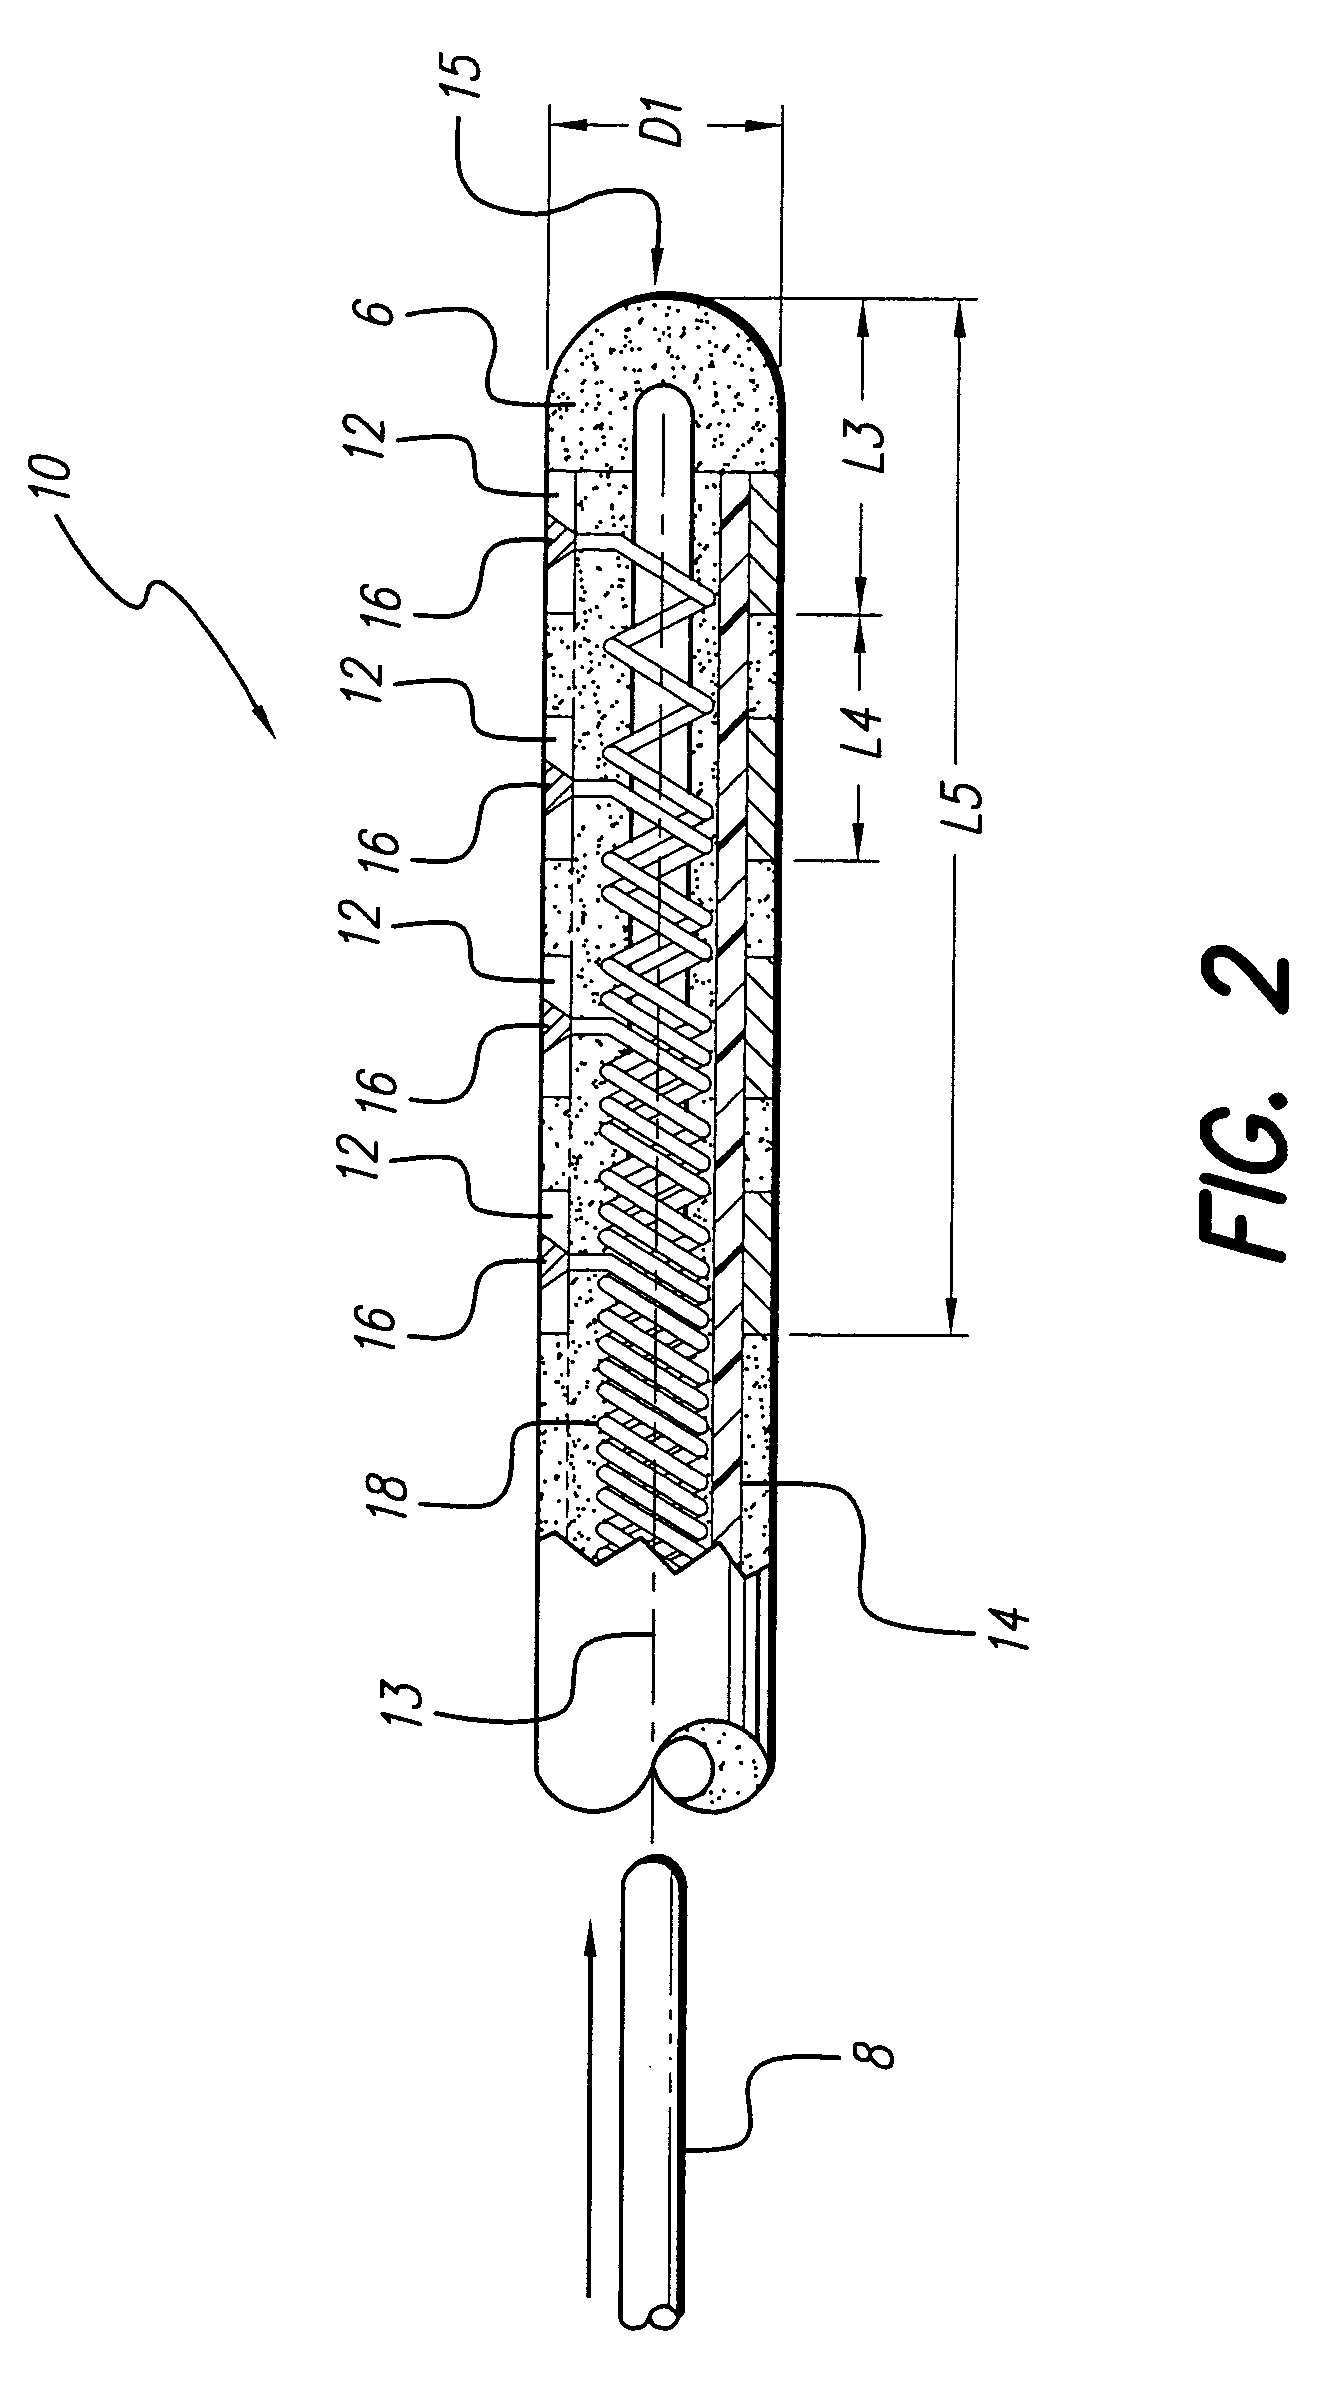 Band type multicontact electrode and method of making the same